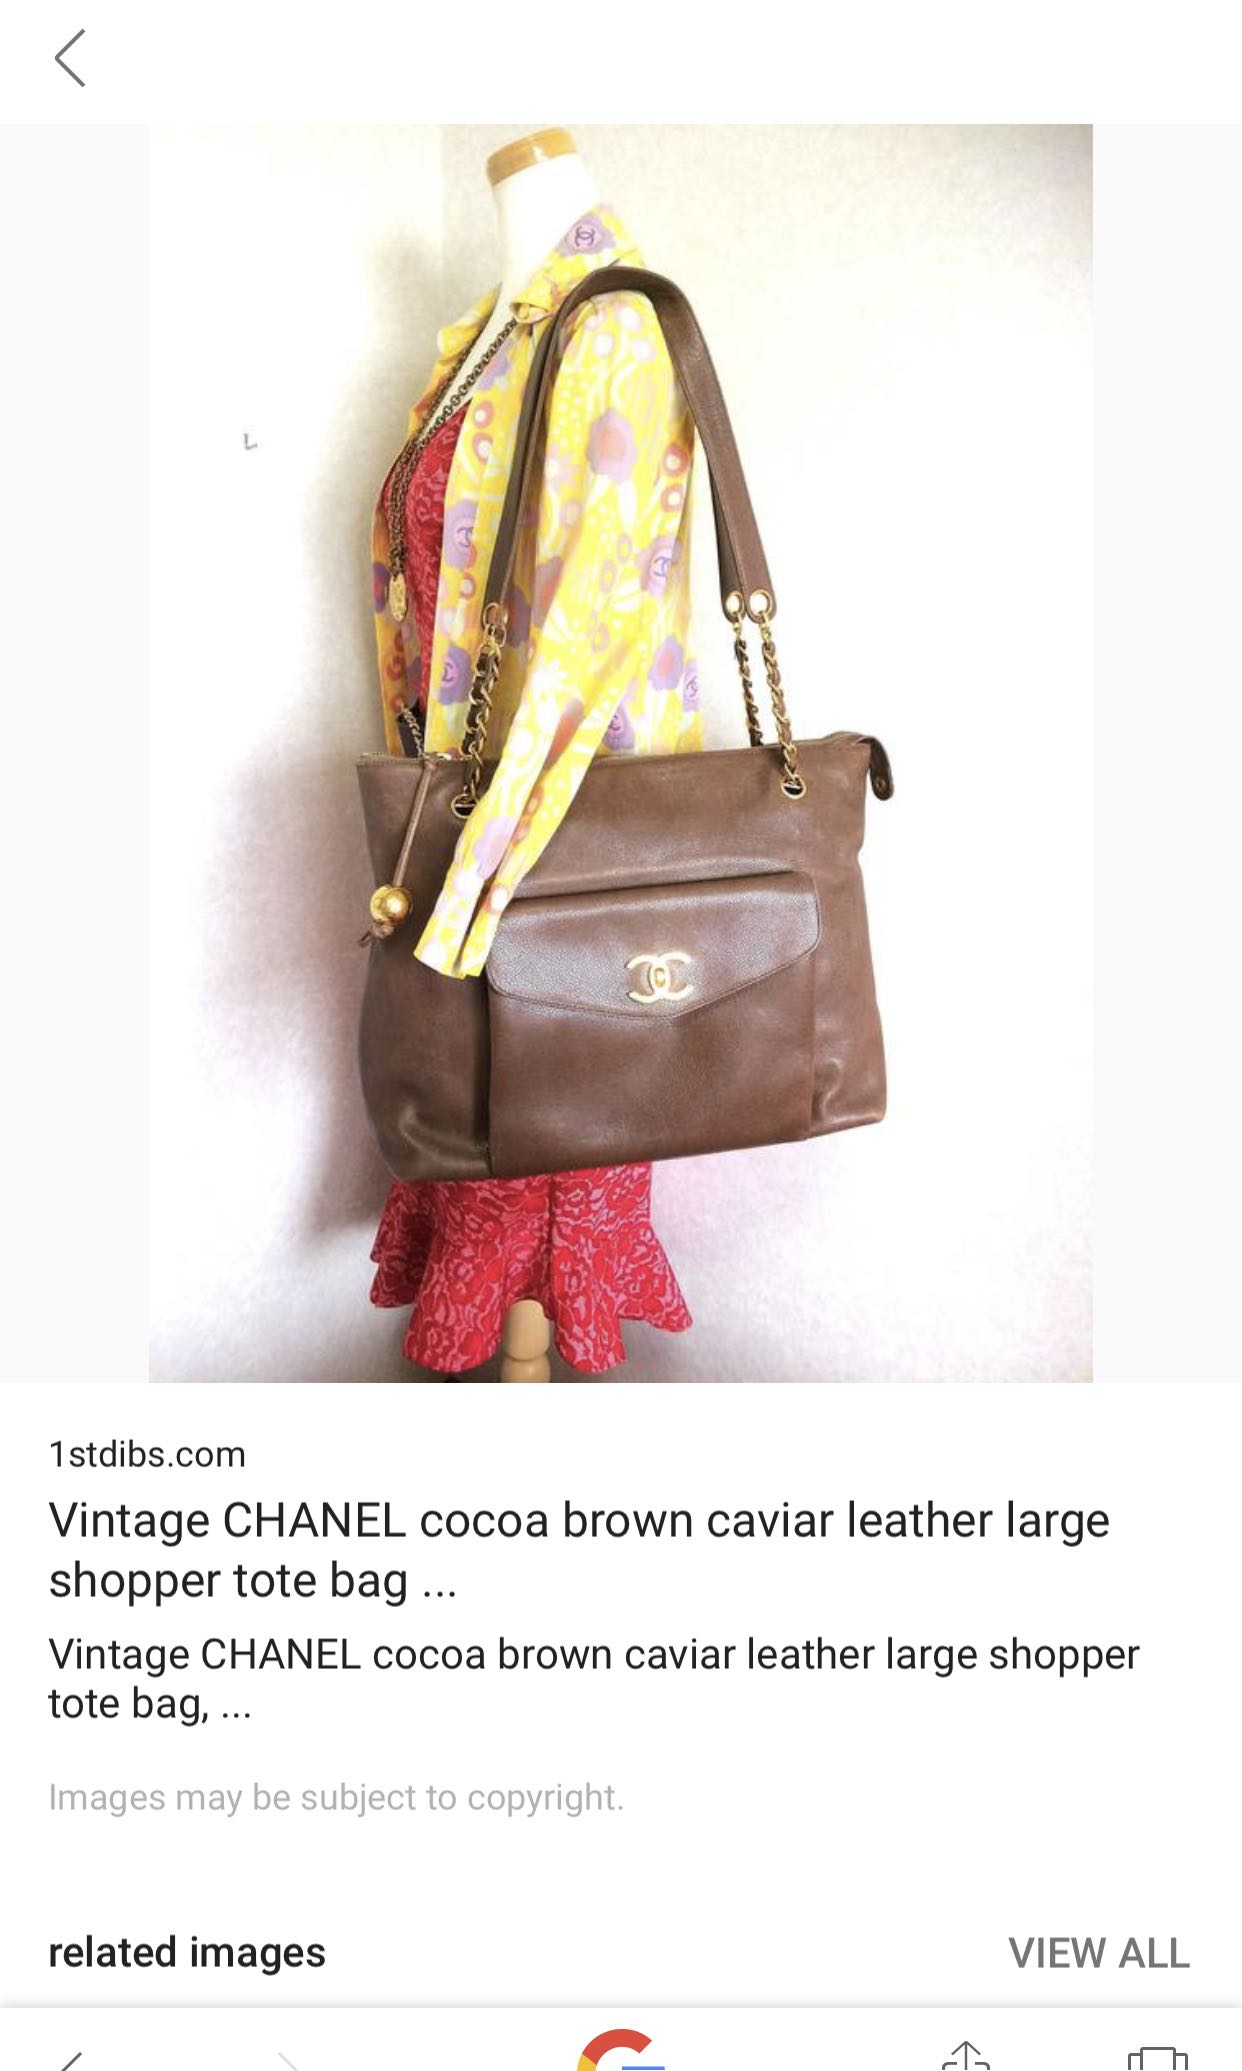 Vintage CHANEL cocoa brown caviar leather large shopper tote bag